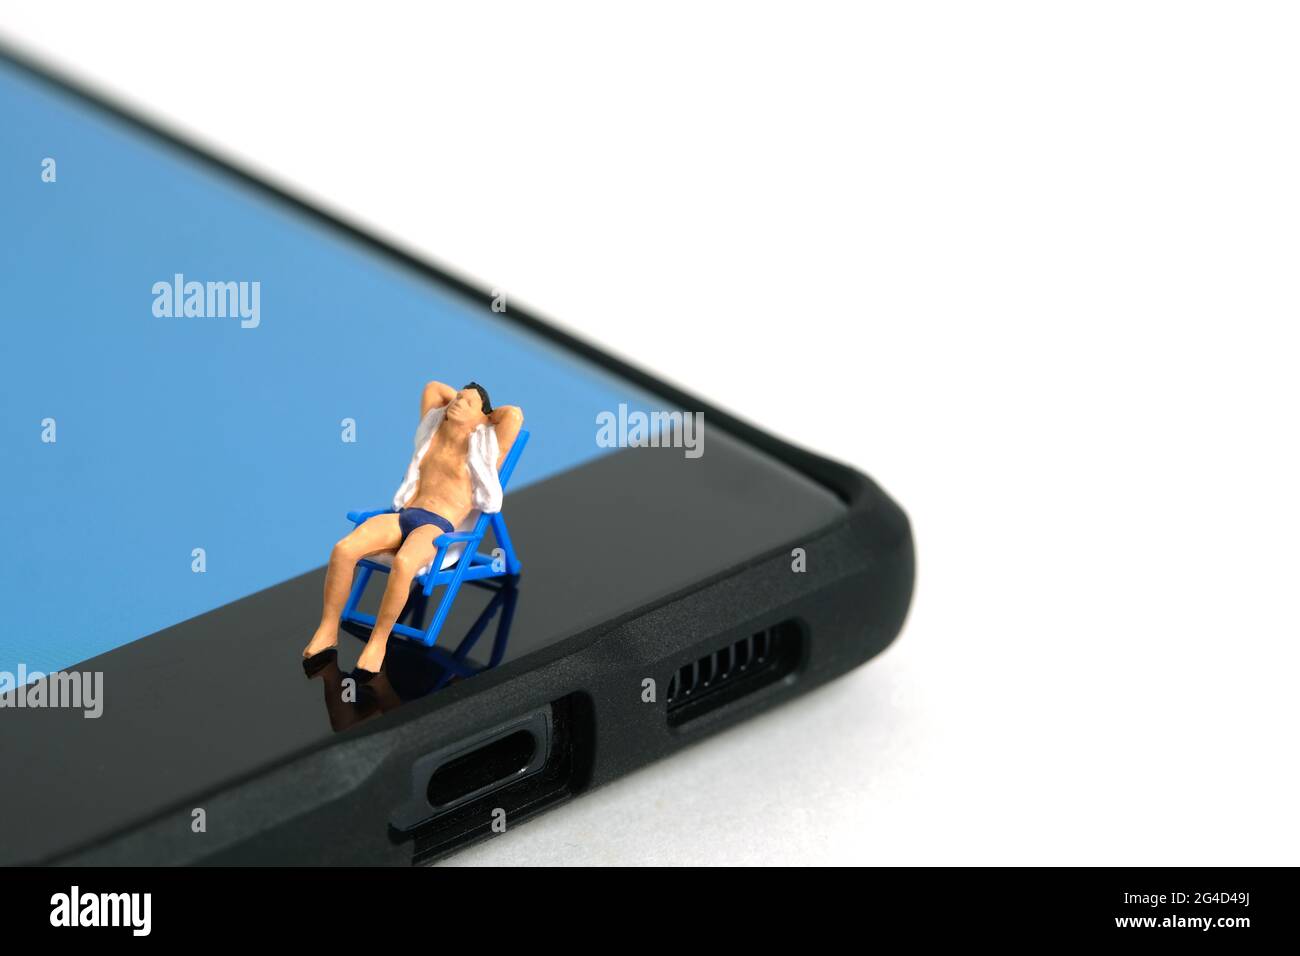 Miniature people toy figure photography. Virtual travel concept, Men relaxing seat at chair above smartphone, isolated on white background. Image phot Stock Photo